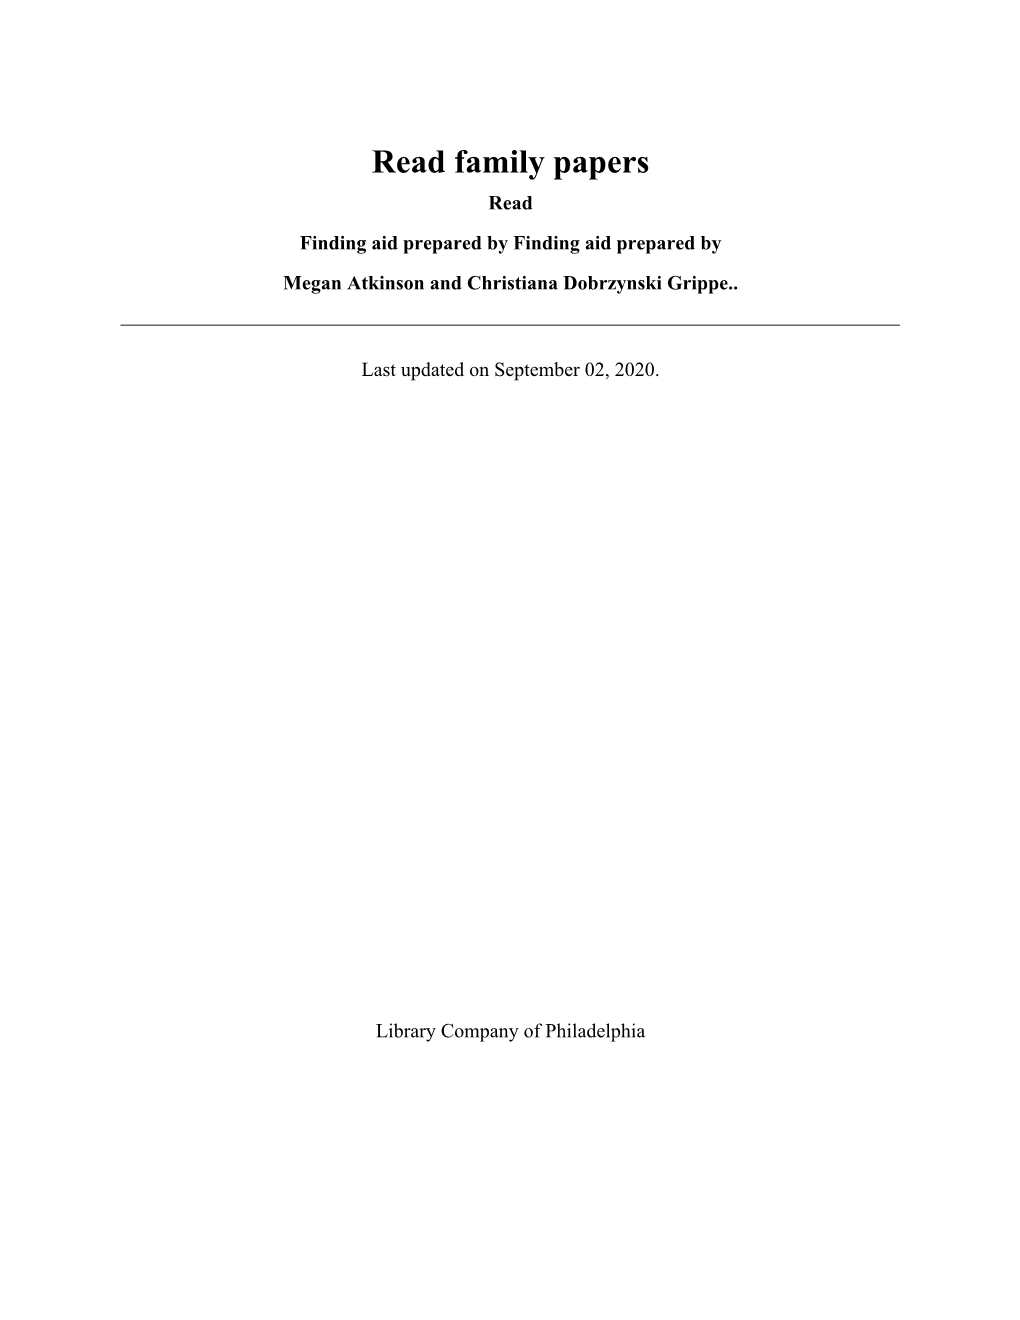 Read Family Papers Read Finding Aid Prepared by Finding Aid Prepared by Megan Atkinson and Christiana Dobrzynski Grippe